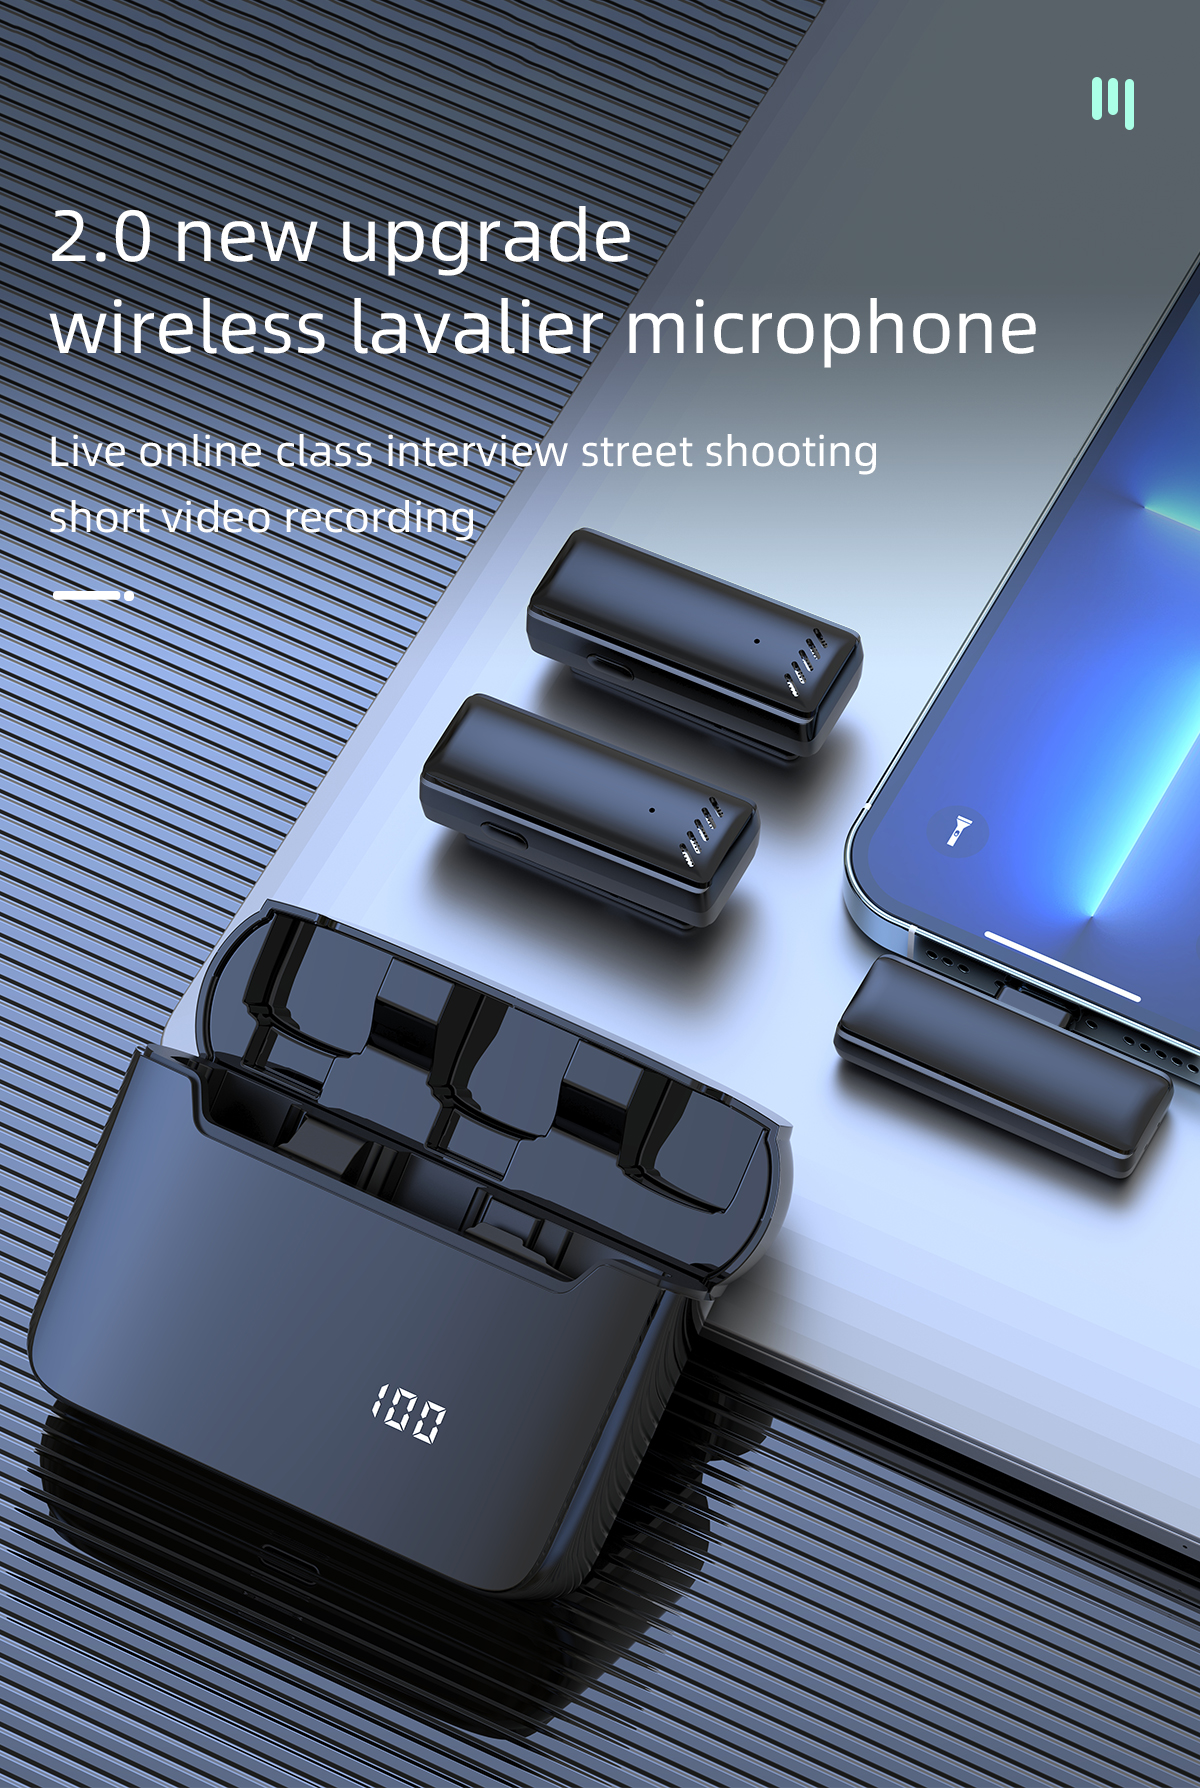 S11 Wireless Lavalier Microphone 300mAh Battery Automatic Noise Reduction for Online Teaching Recording with Charging Case